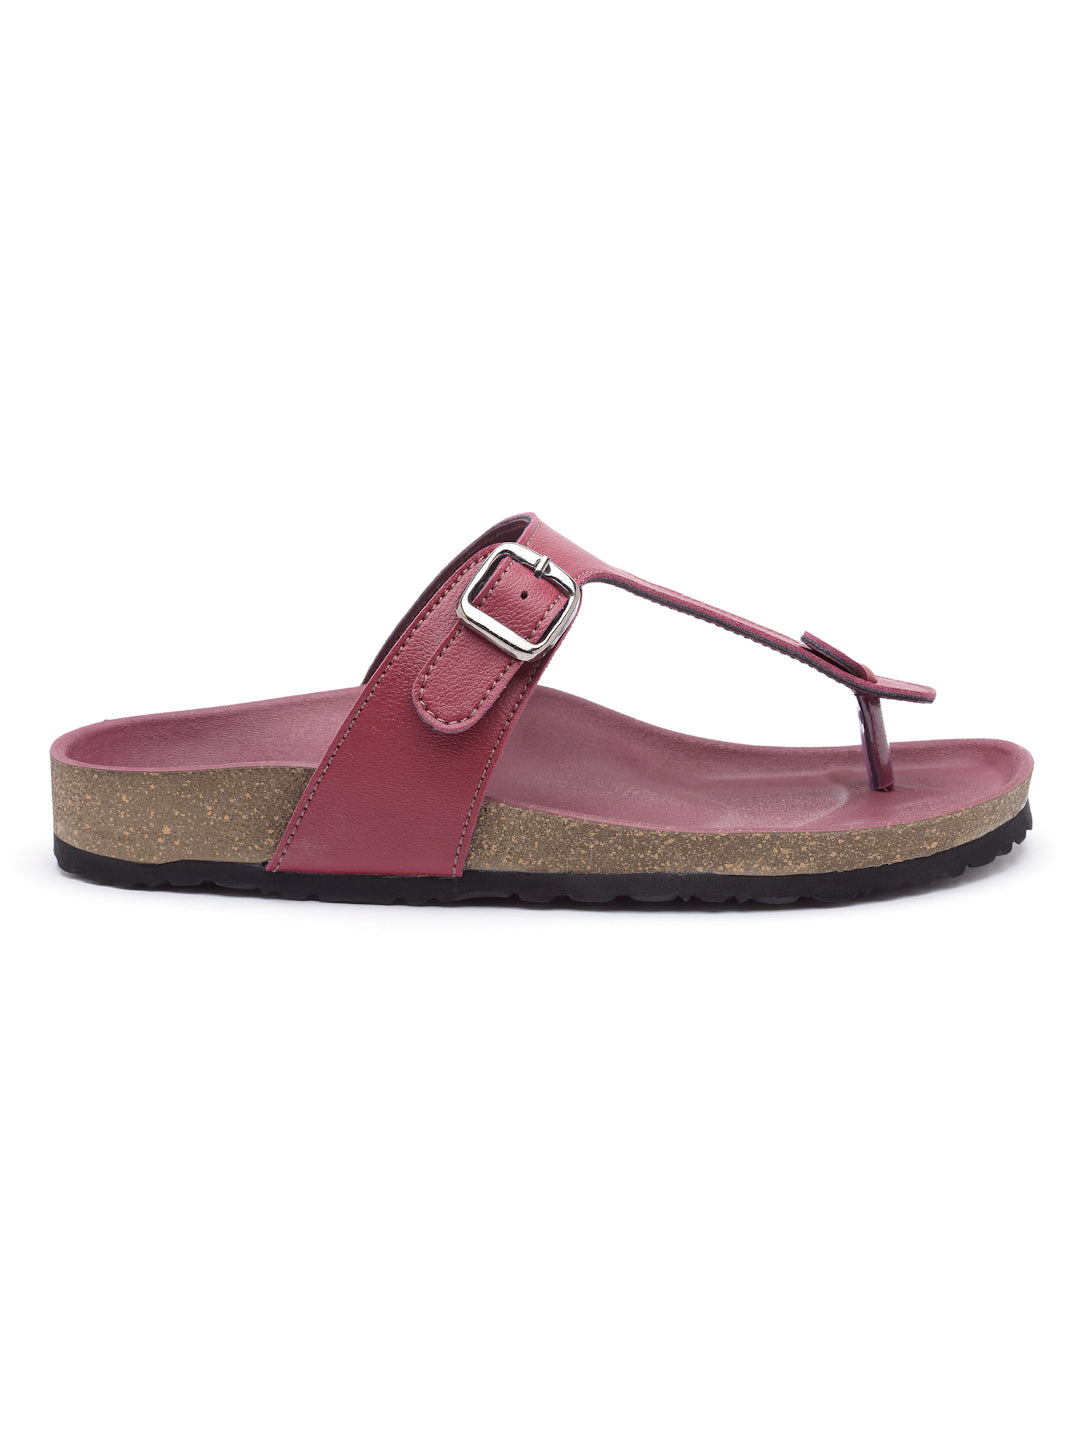 Women's Outdoor Stylish Maroon Synthetic Leather Casual Sandal